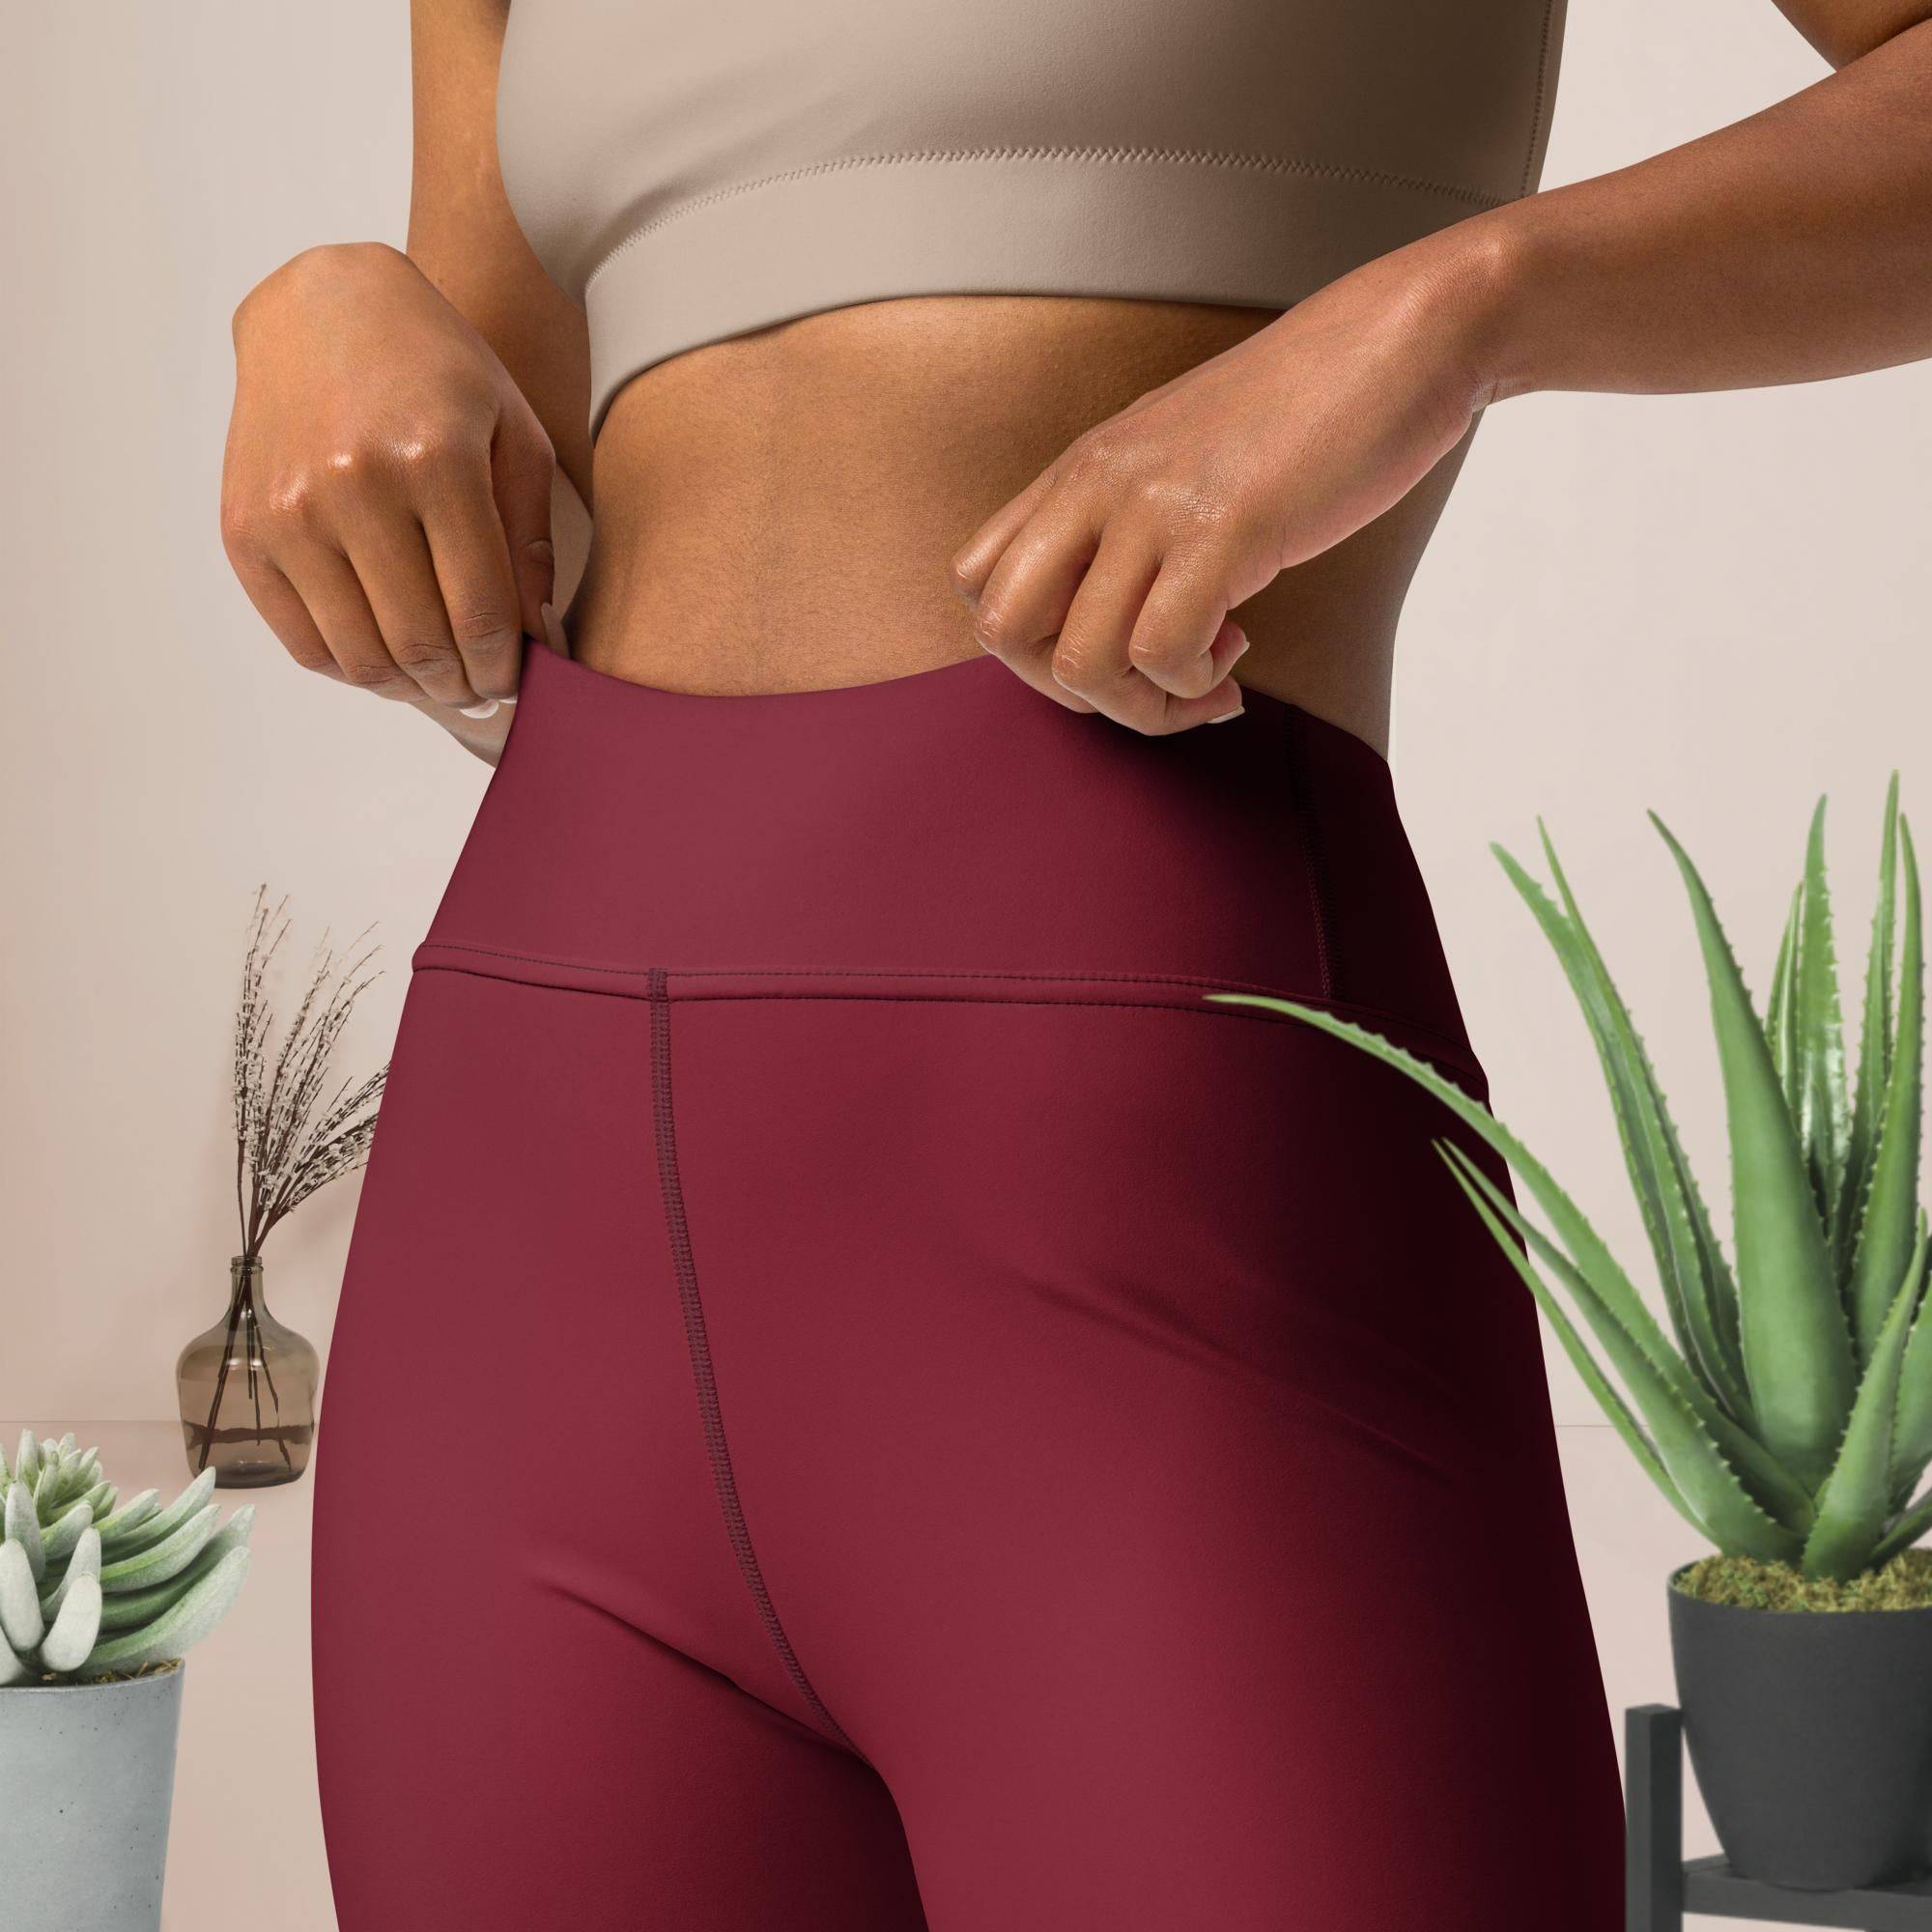 Red Floral Blossom Yoga Workout Leggings - Revive Wear     Experience comfort and style with our Red Floral Leggings from Revive Wear. Crafted for an ultra-comfort and support. Shop Leggings Today.